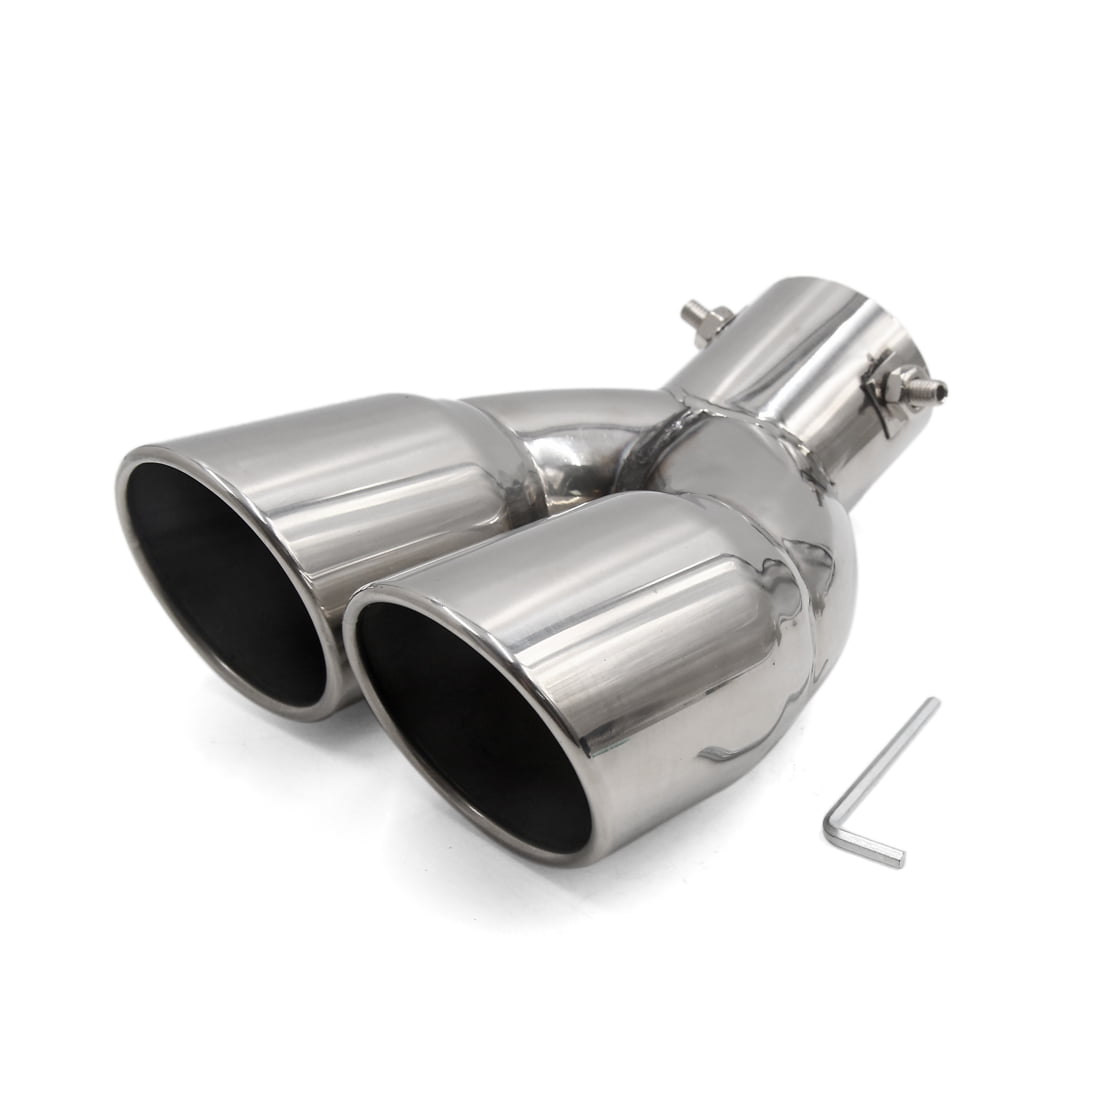 53-38mm Car Single Straight Exhaust Pipe Rear Muffler Tip Tail Throat Glossy Silver Stainless Steel KIMISS Universal Straight Exhaust Pipe 